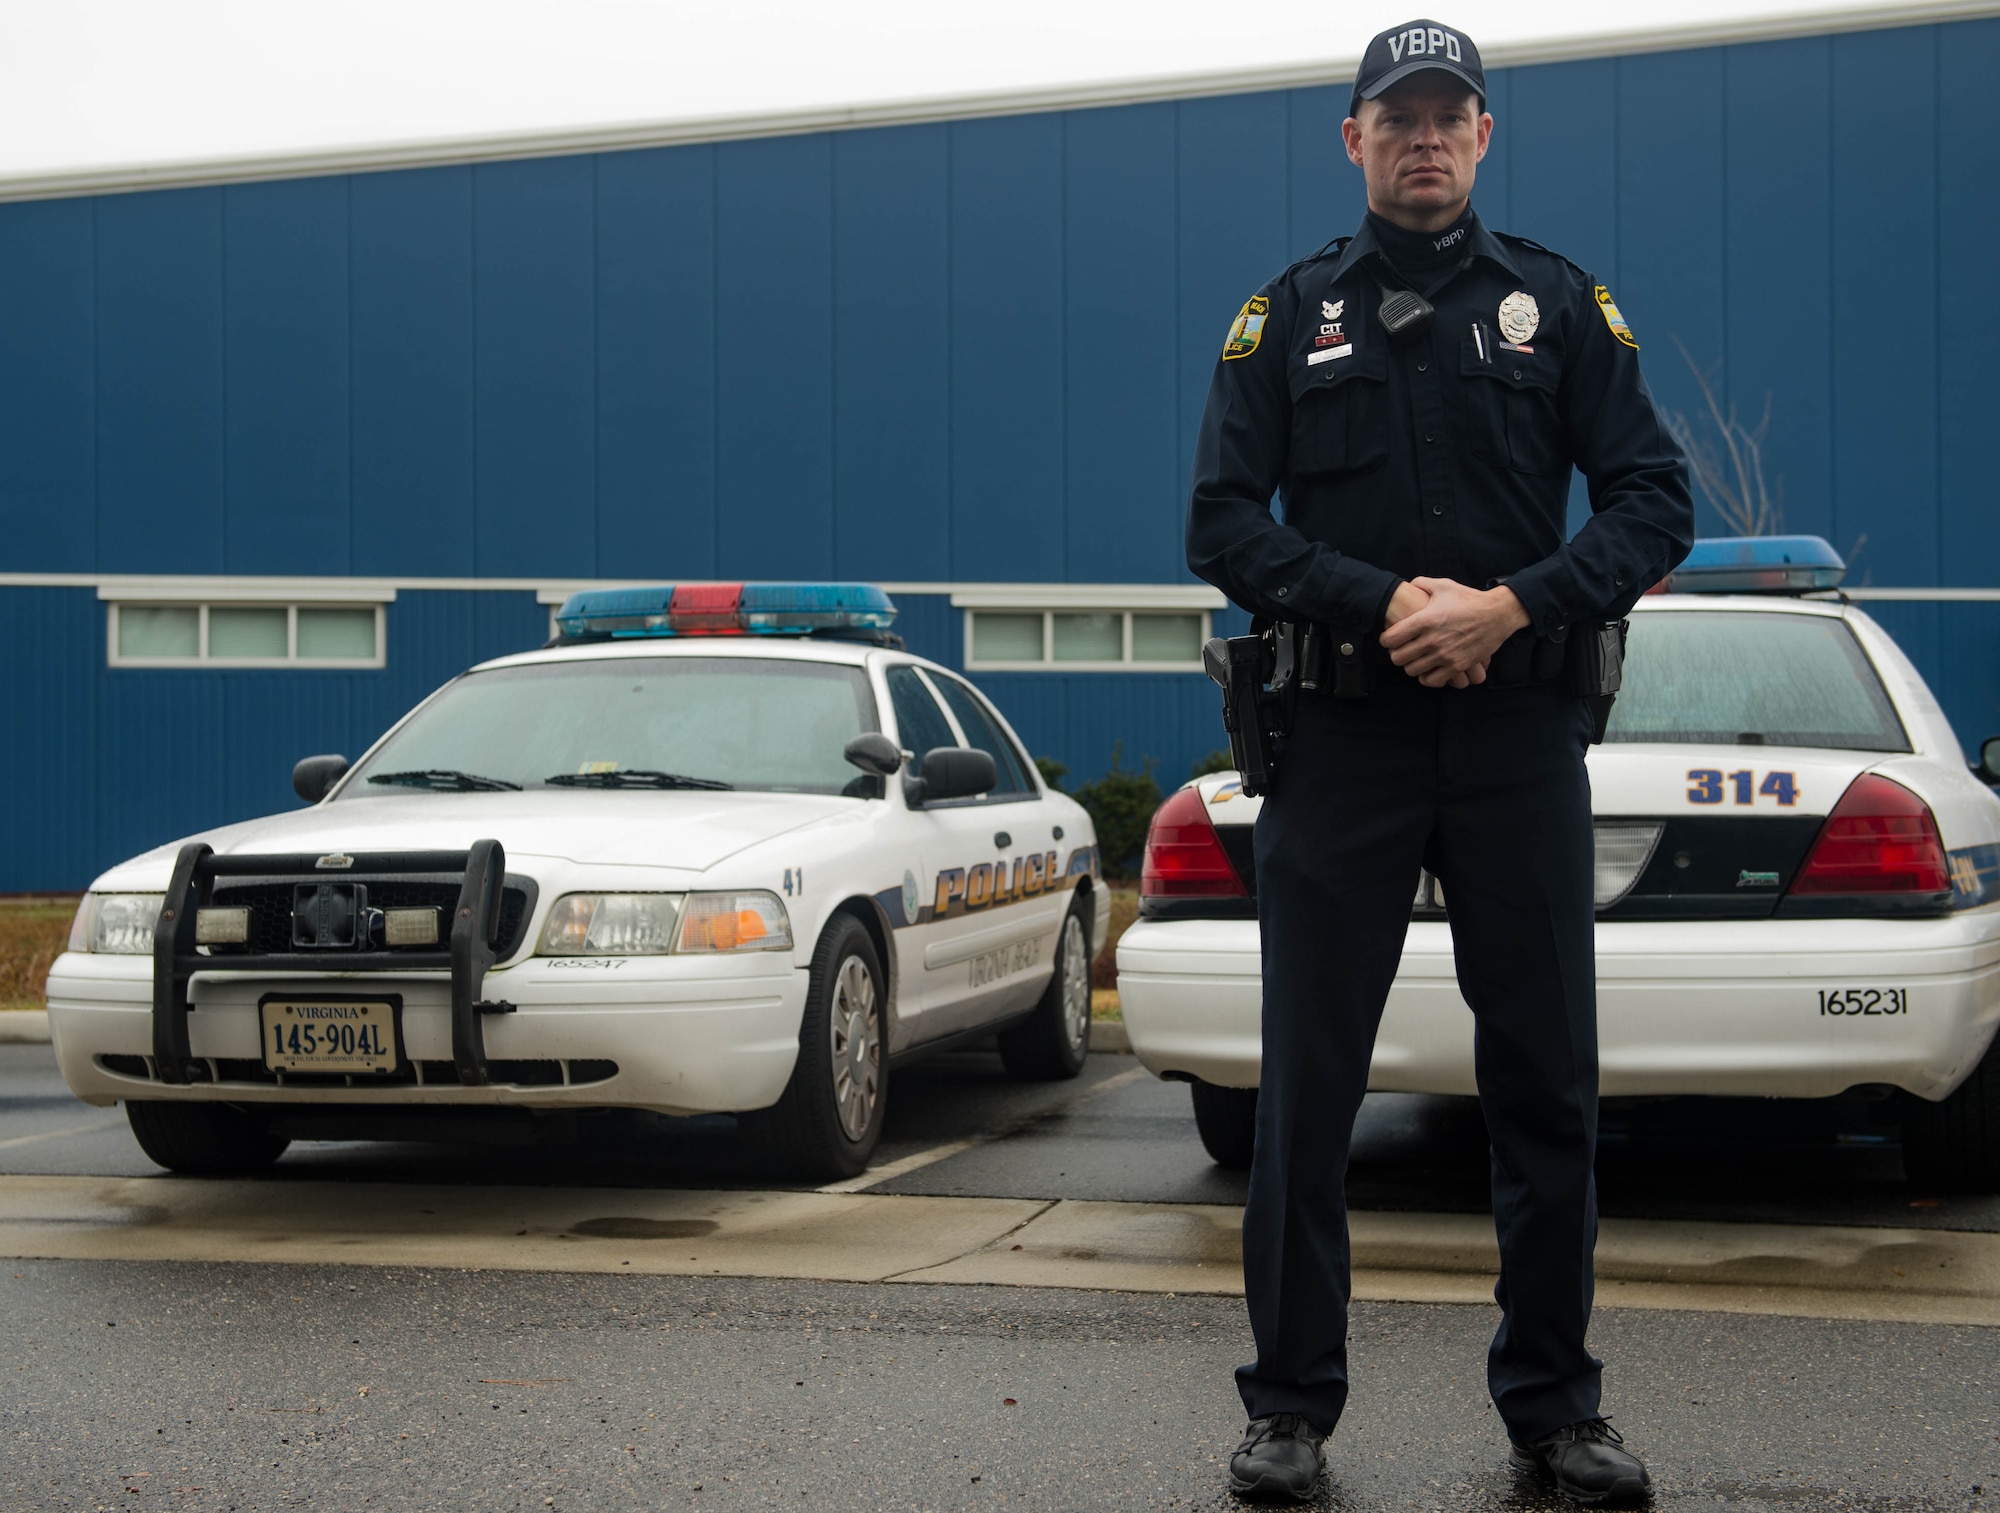 Eli Kendrick, Virginia Police Department master police officer, stands in front of the Ready Response Team’s vehicles in Virginia Beach, Virginia, December 6, 2017. Kendrick also works at Joint Base Langley-Eustis’ 63rd Intelligence Squadron, and was formerly active duty in the U.S. Marine Corps. (U.S. Air Force photo by Senior Airman Derek Seifert)